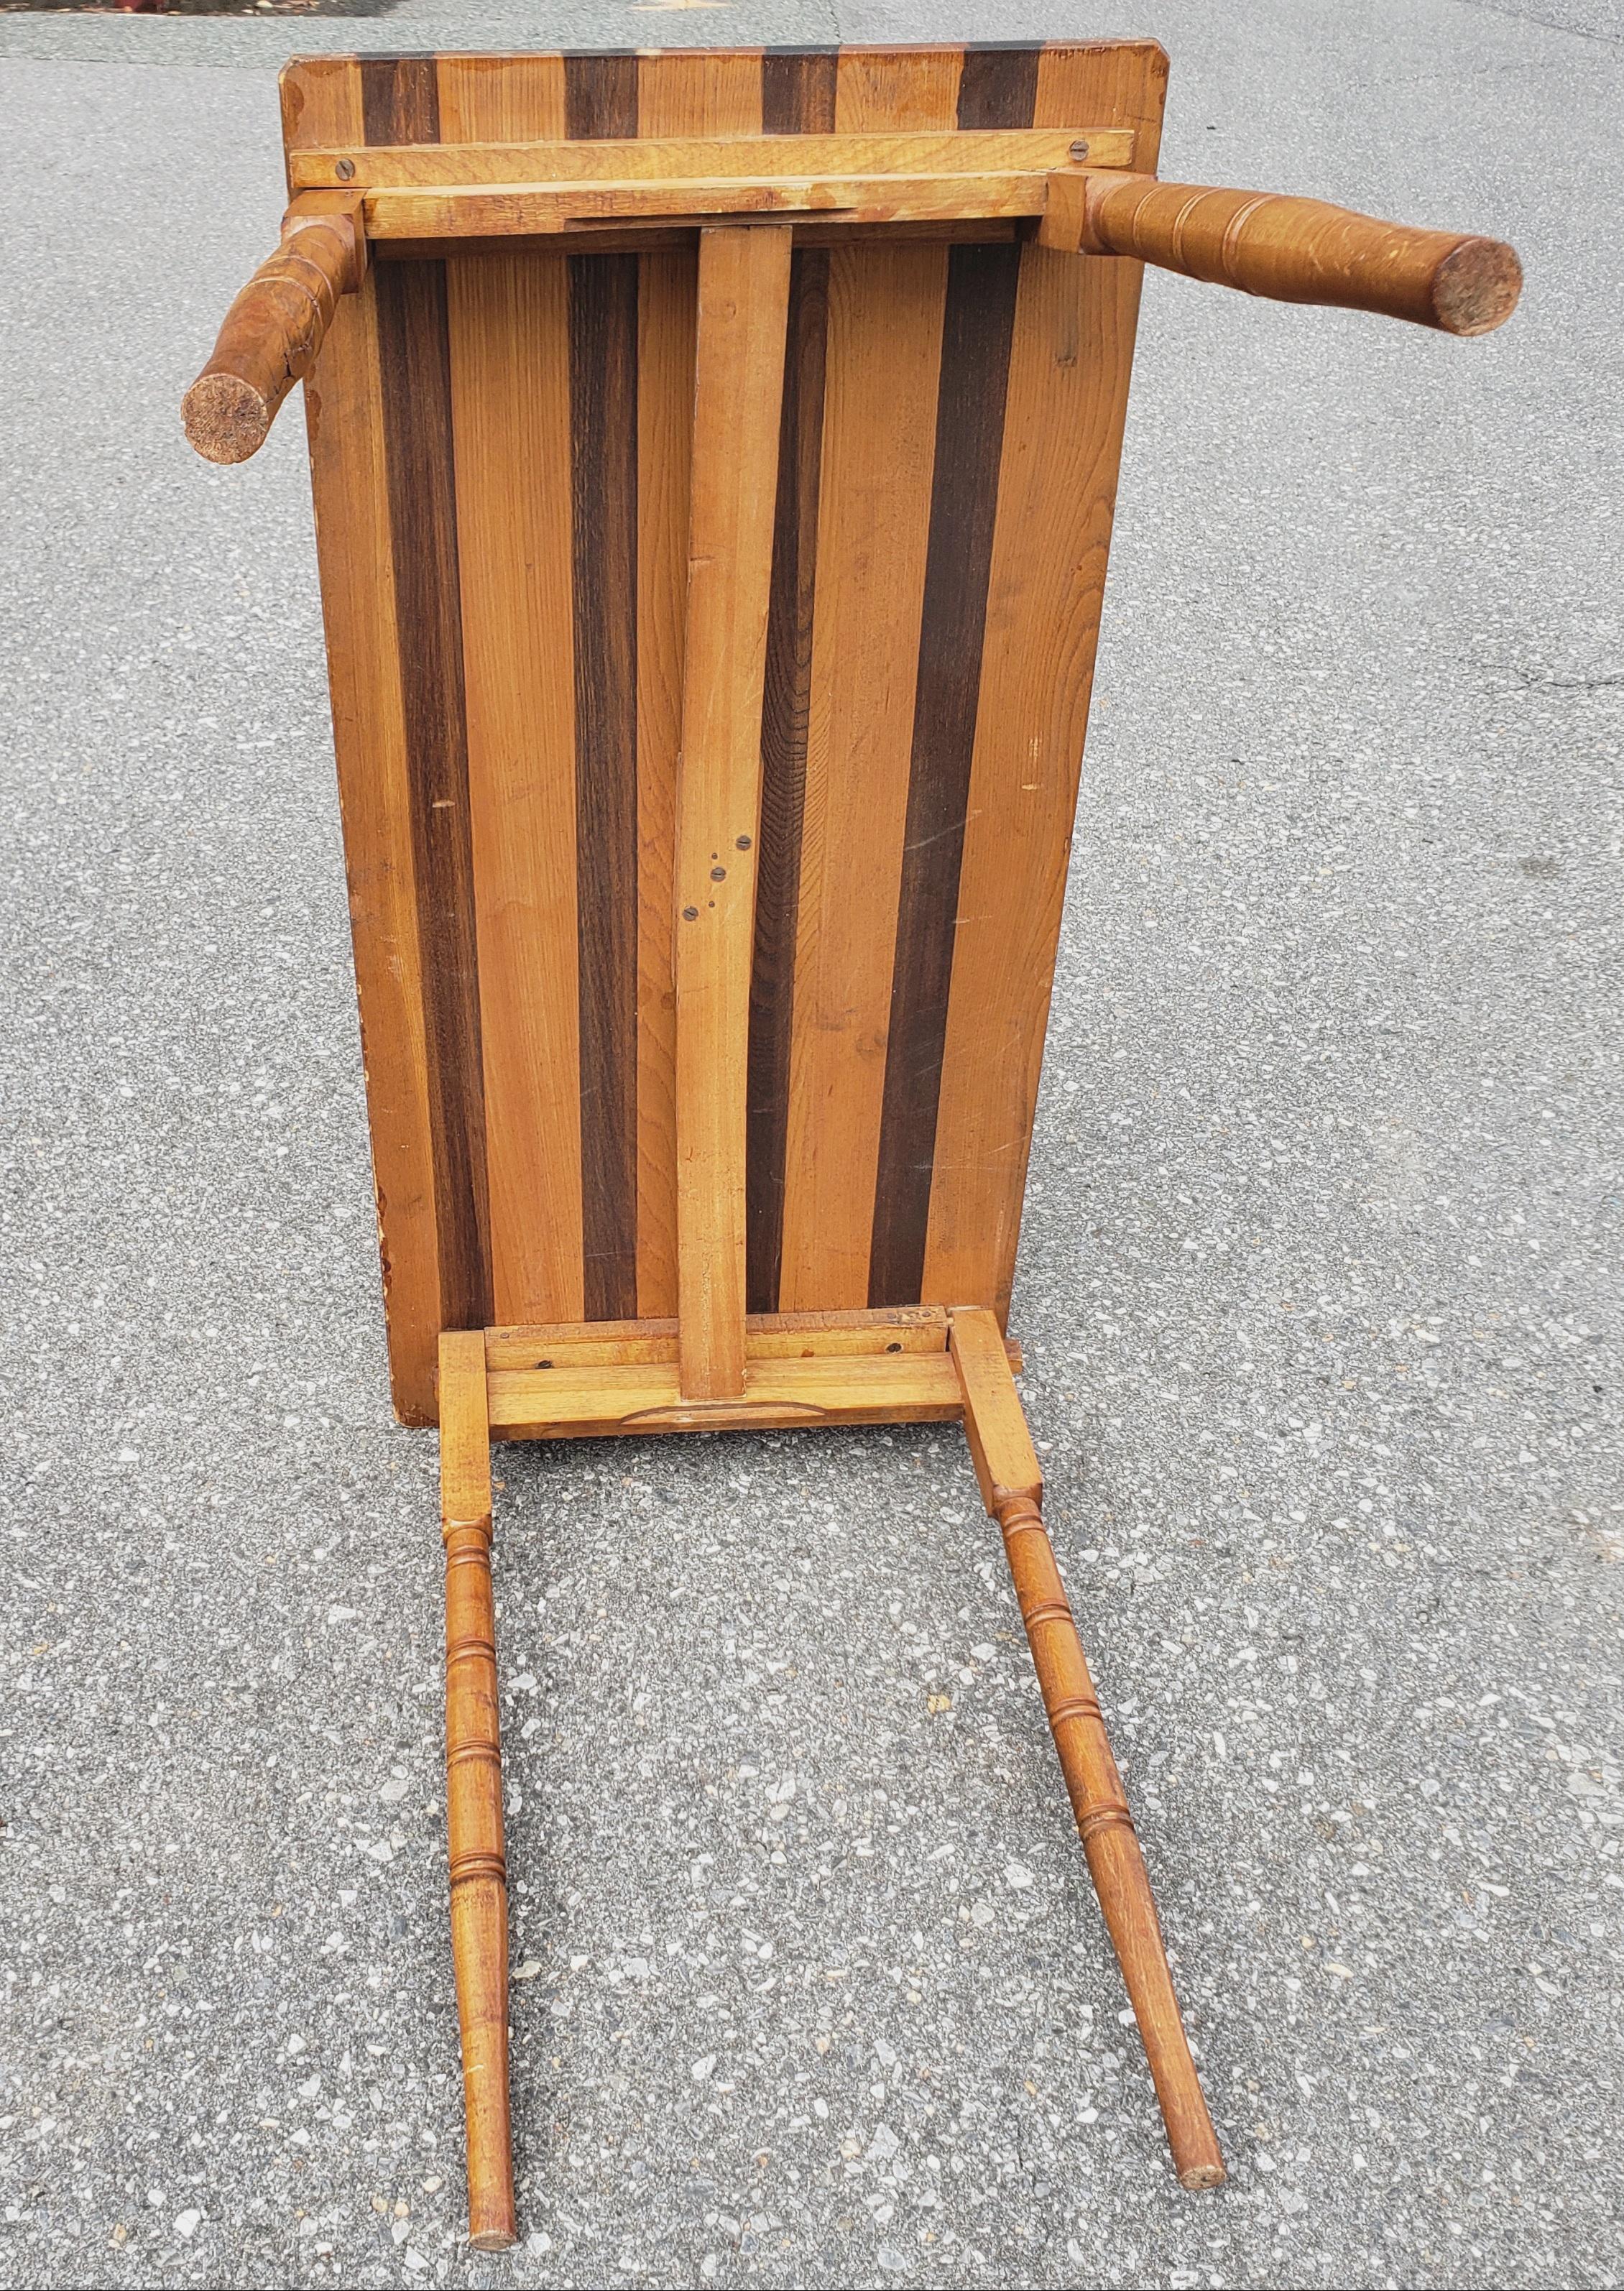 Antique Collapsable Wood Industrial Work Table with Ruler In Good Condition For Sale In Germantown, MD